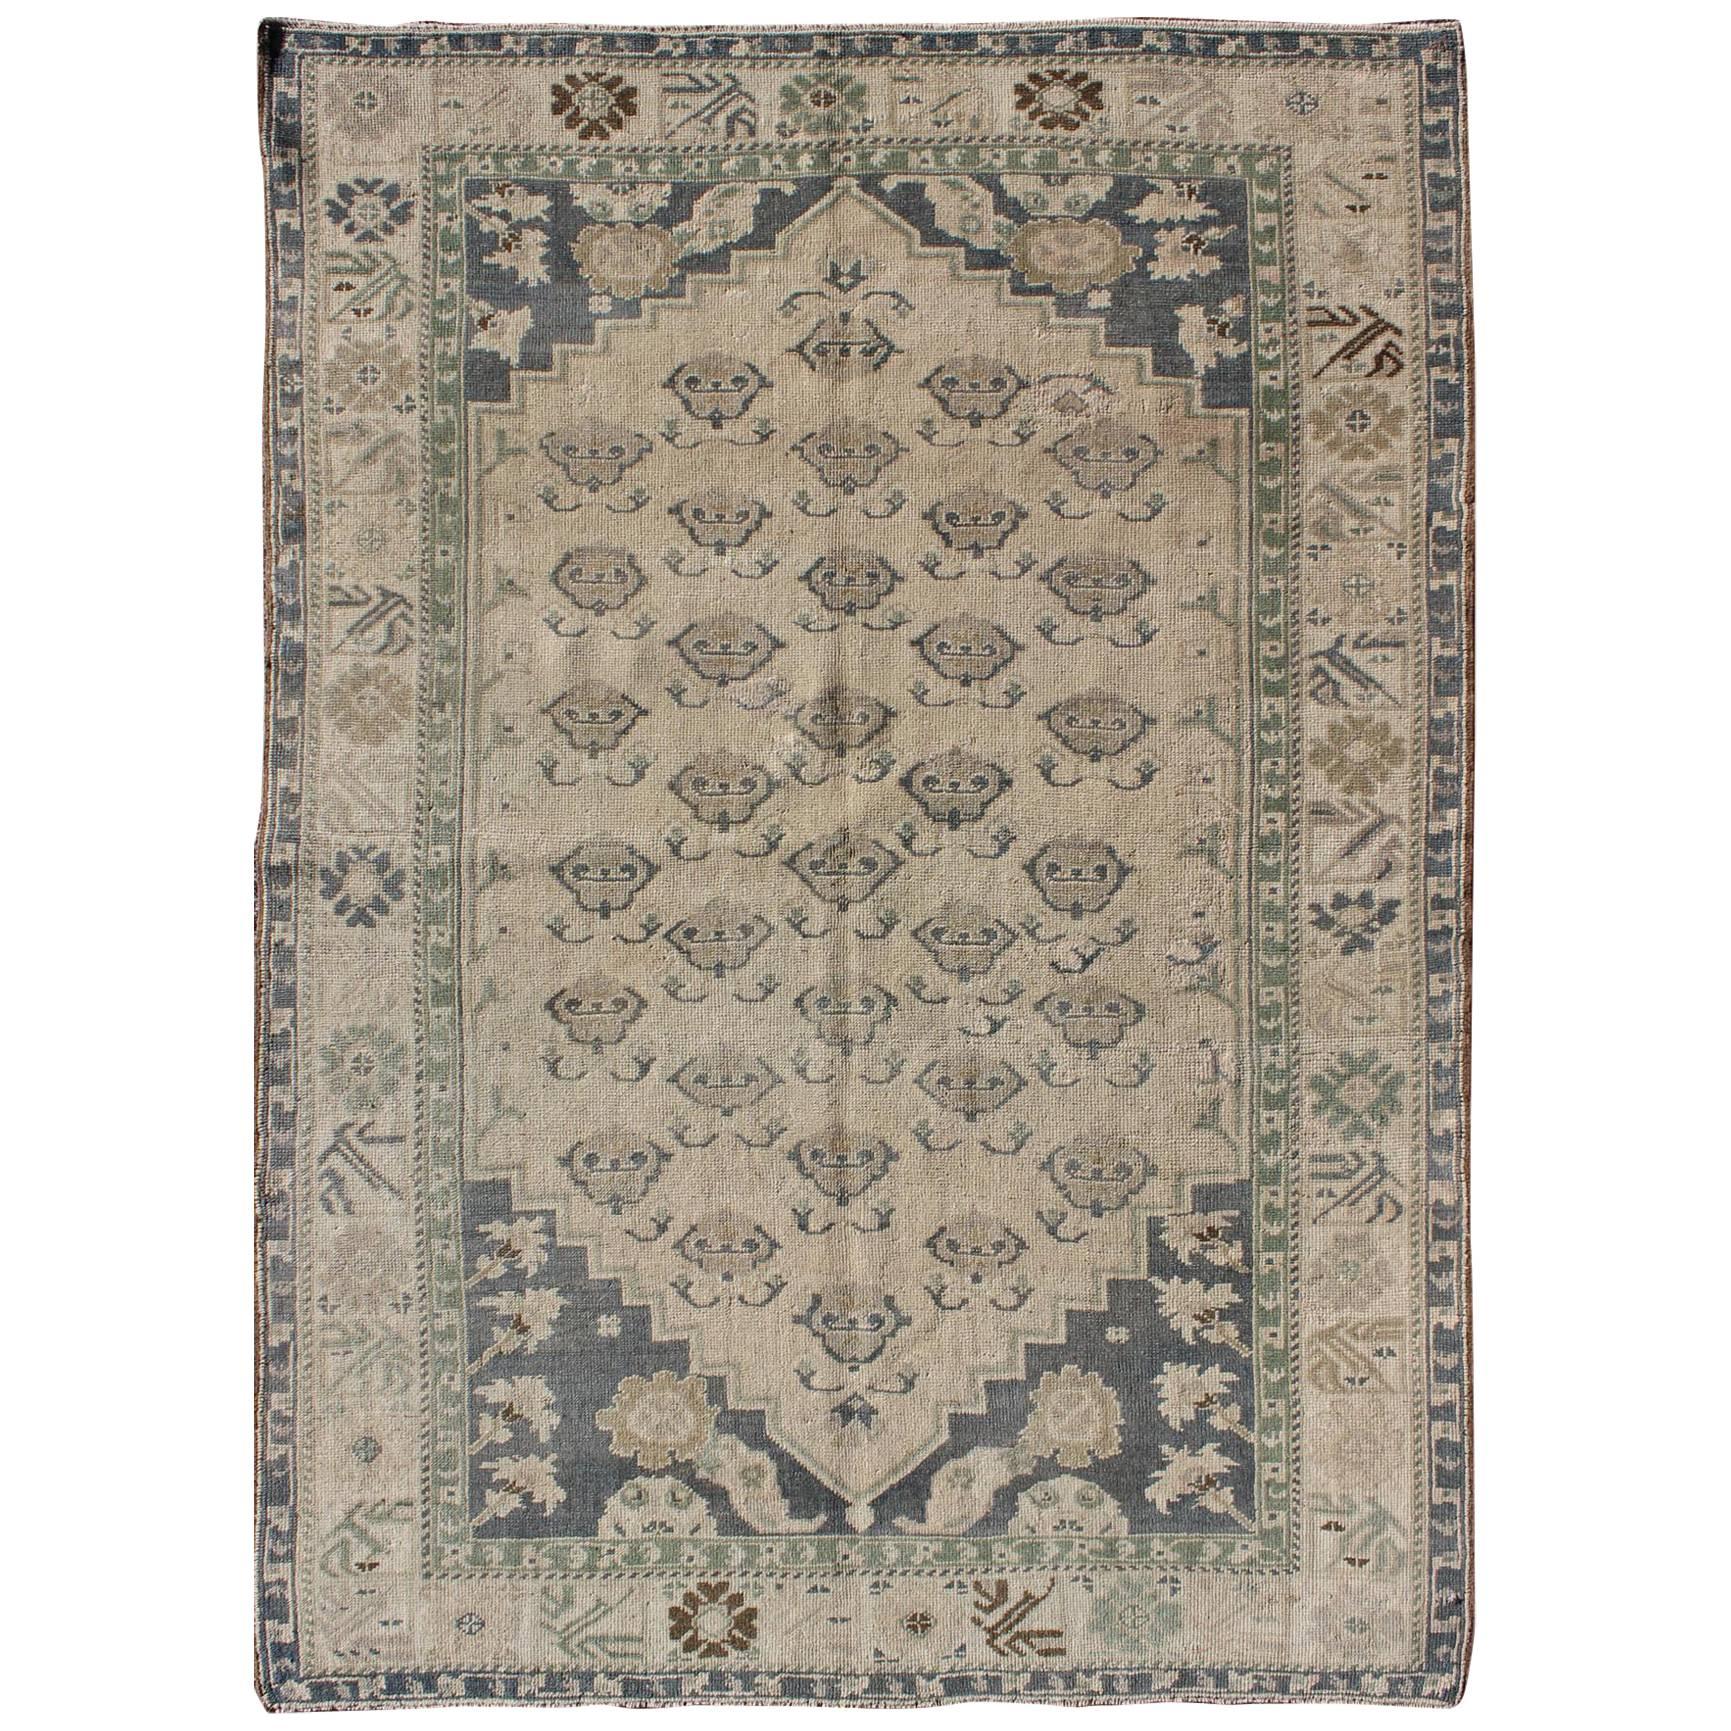 All-Over Blossom Design Vintage Turkish Oushak Rug in Taupe and Greyish Blue